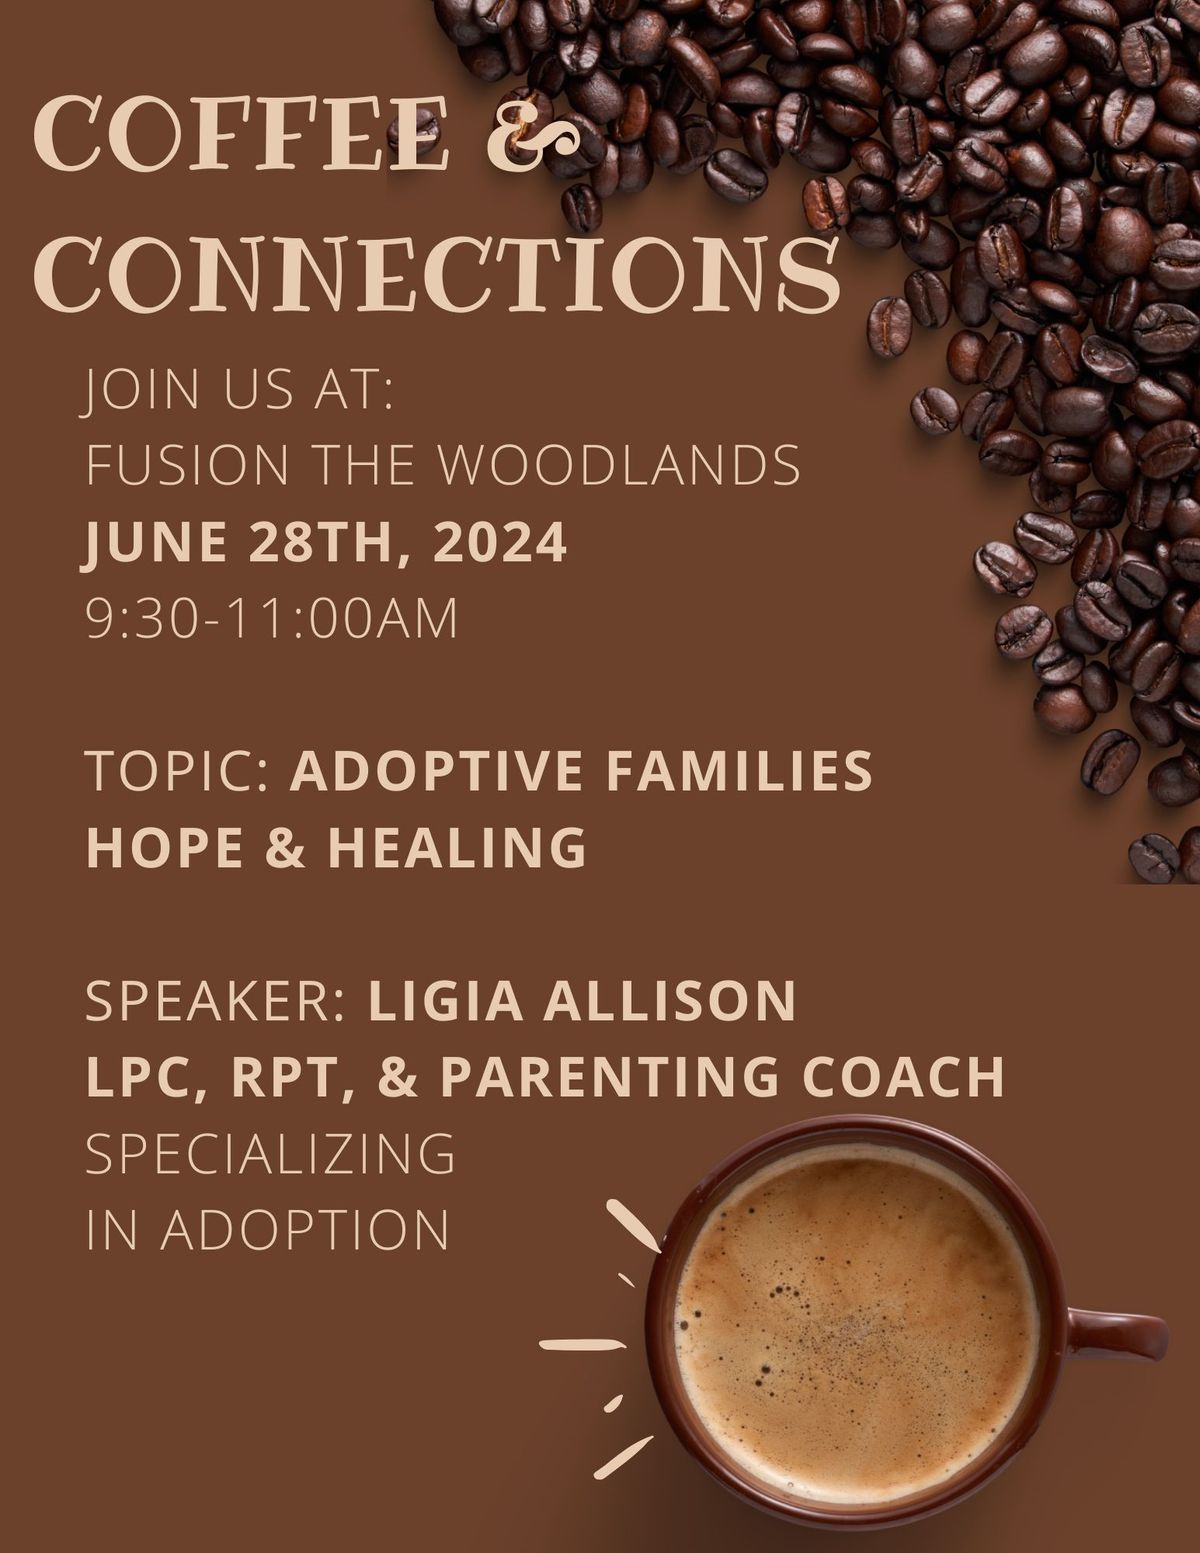 Coffee & Connections Adoptive Families: Hope and Healing